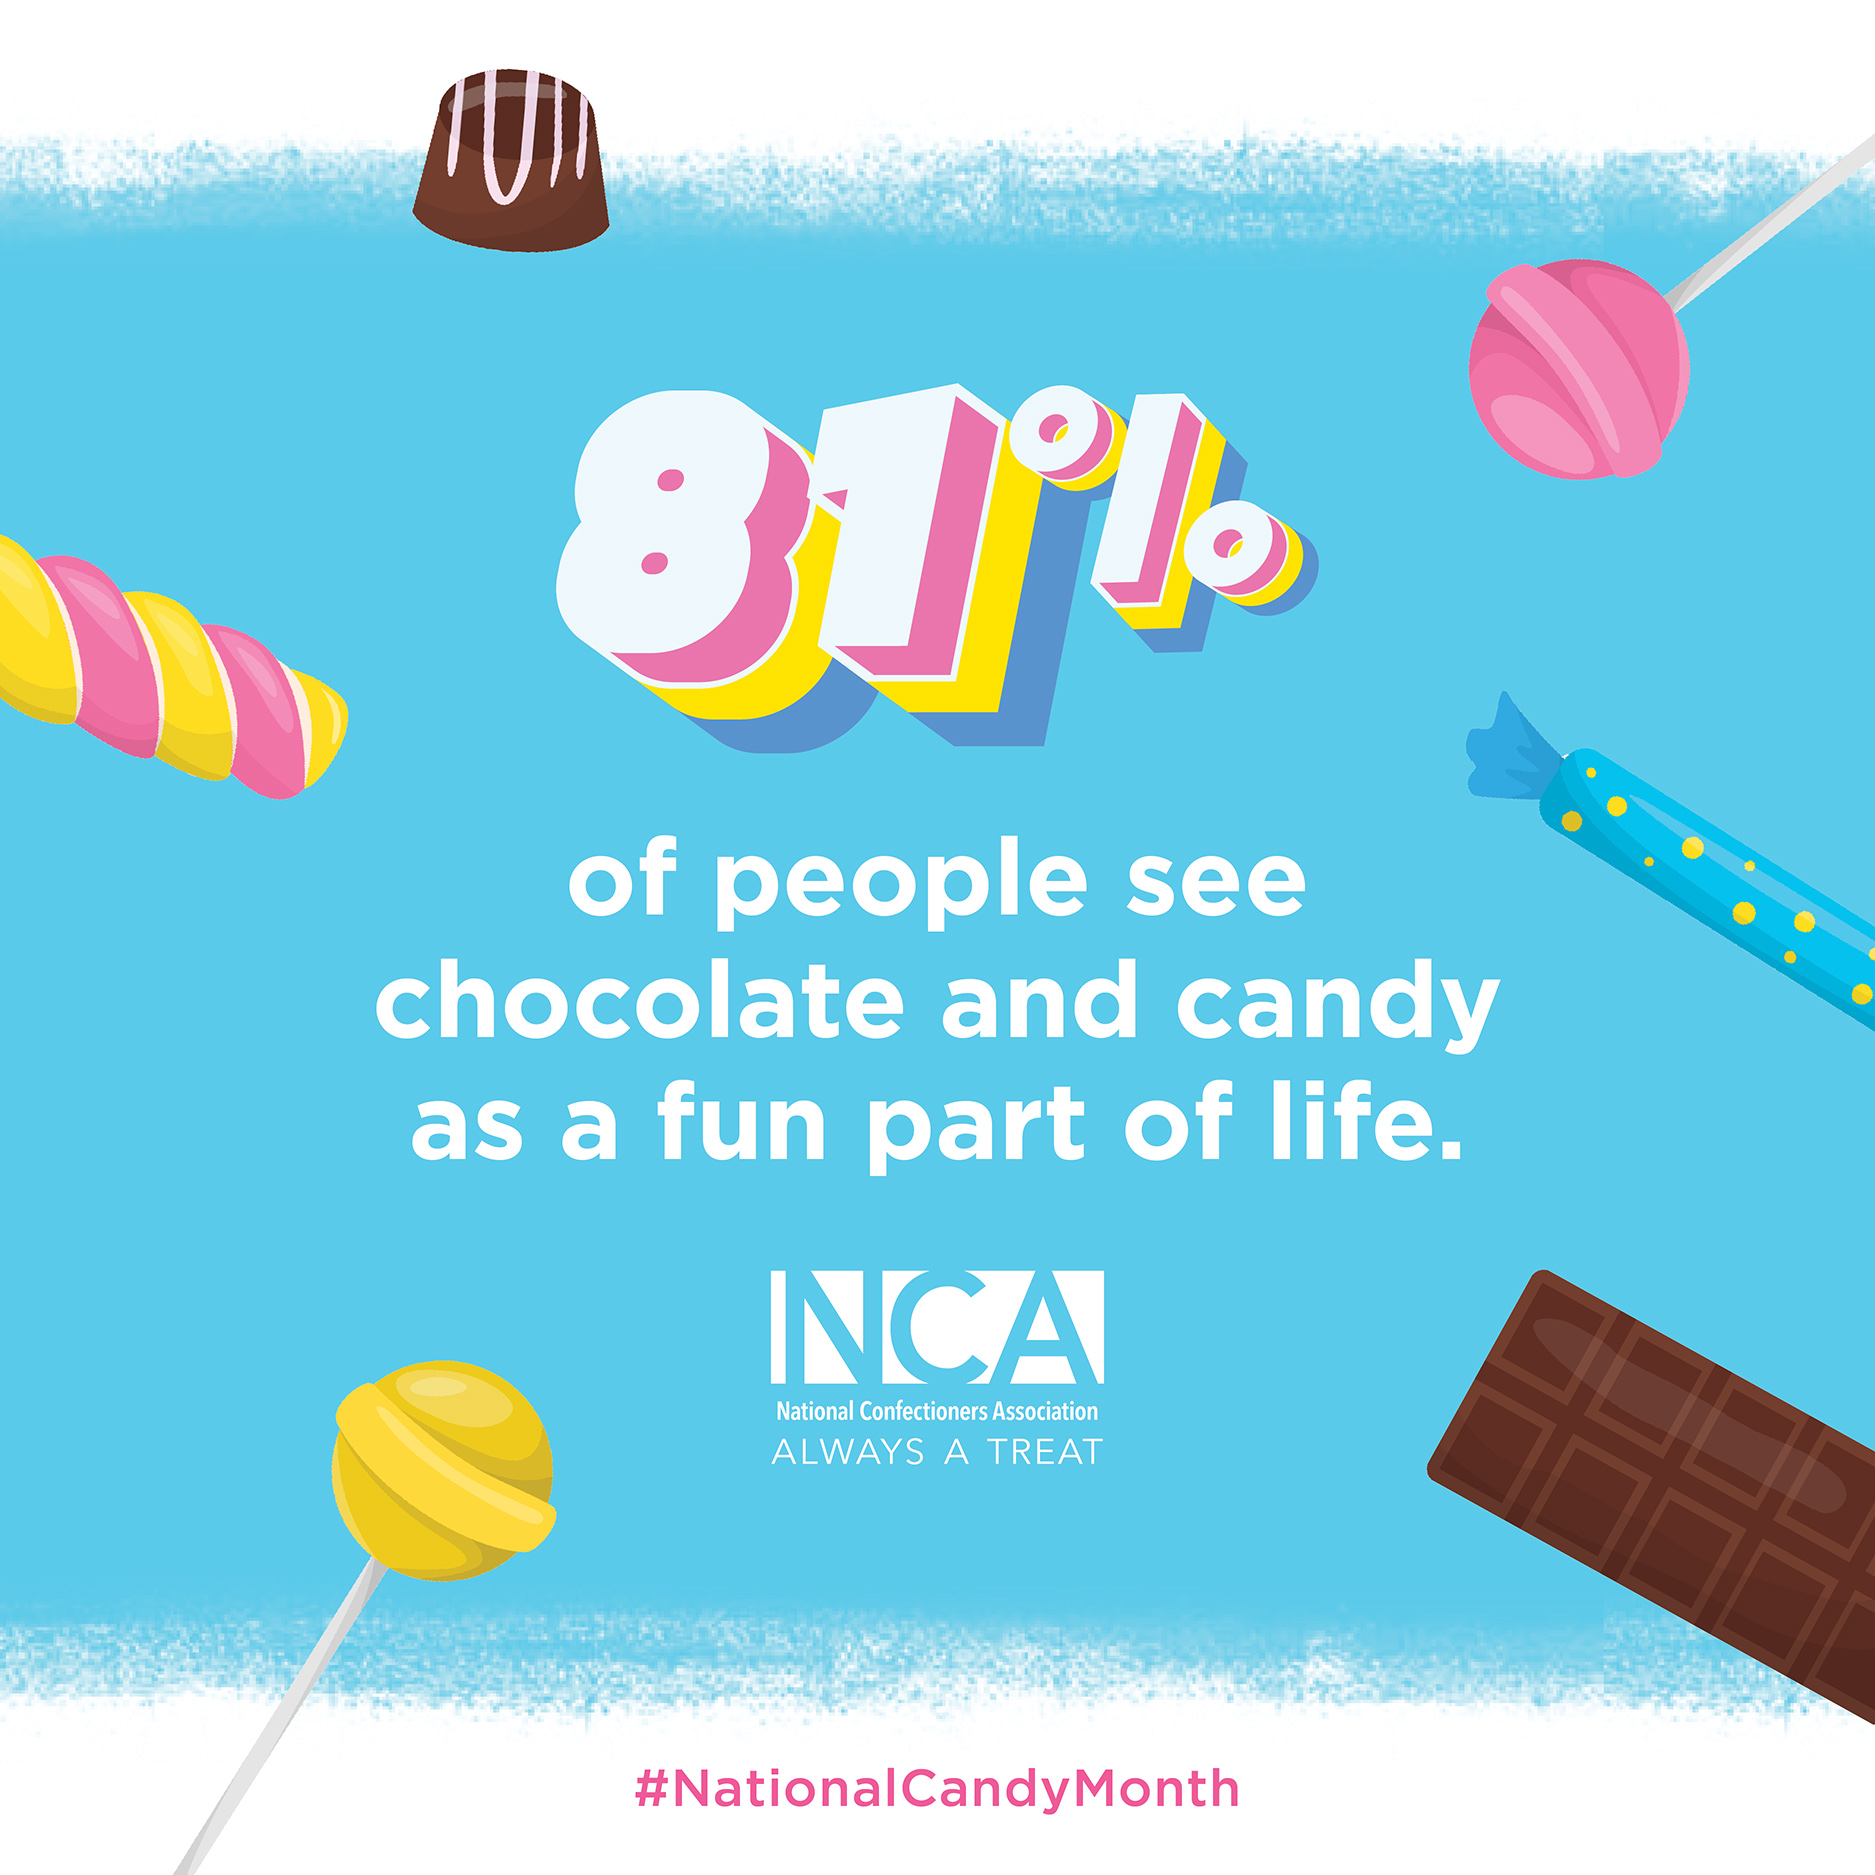 81% of people see chocolate and candy as a fun part of life